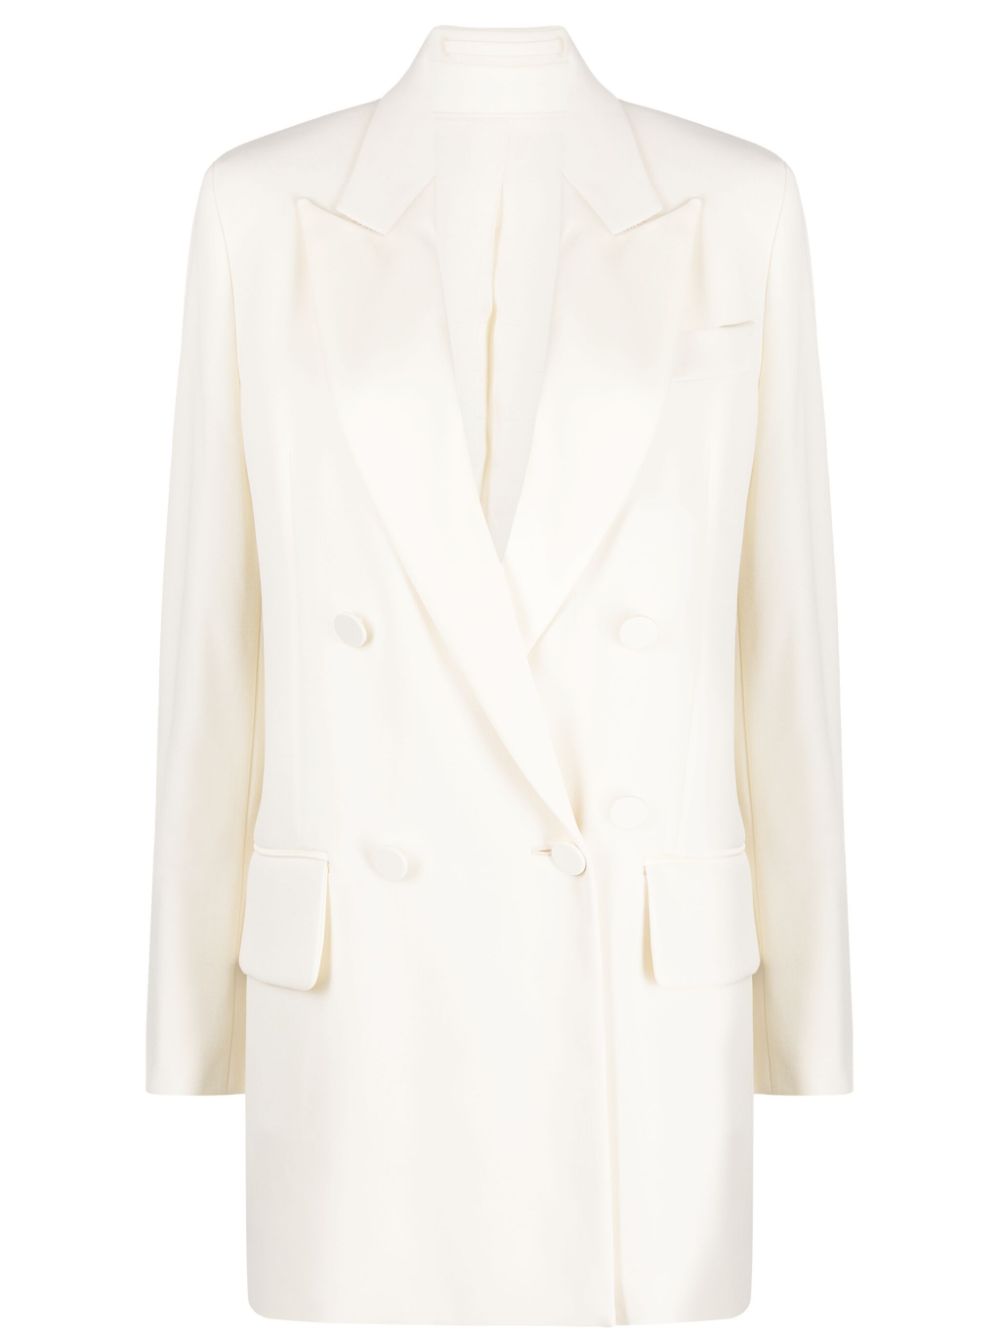 MAX MARA PIANOFORTE Double-Breasted Wool Blazer Jacket for Women in Winter White - FW23 Collection